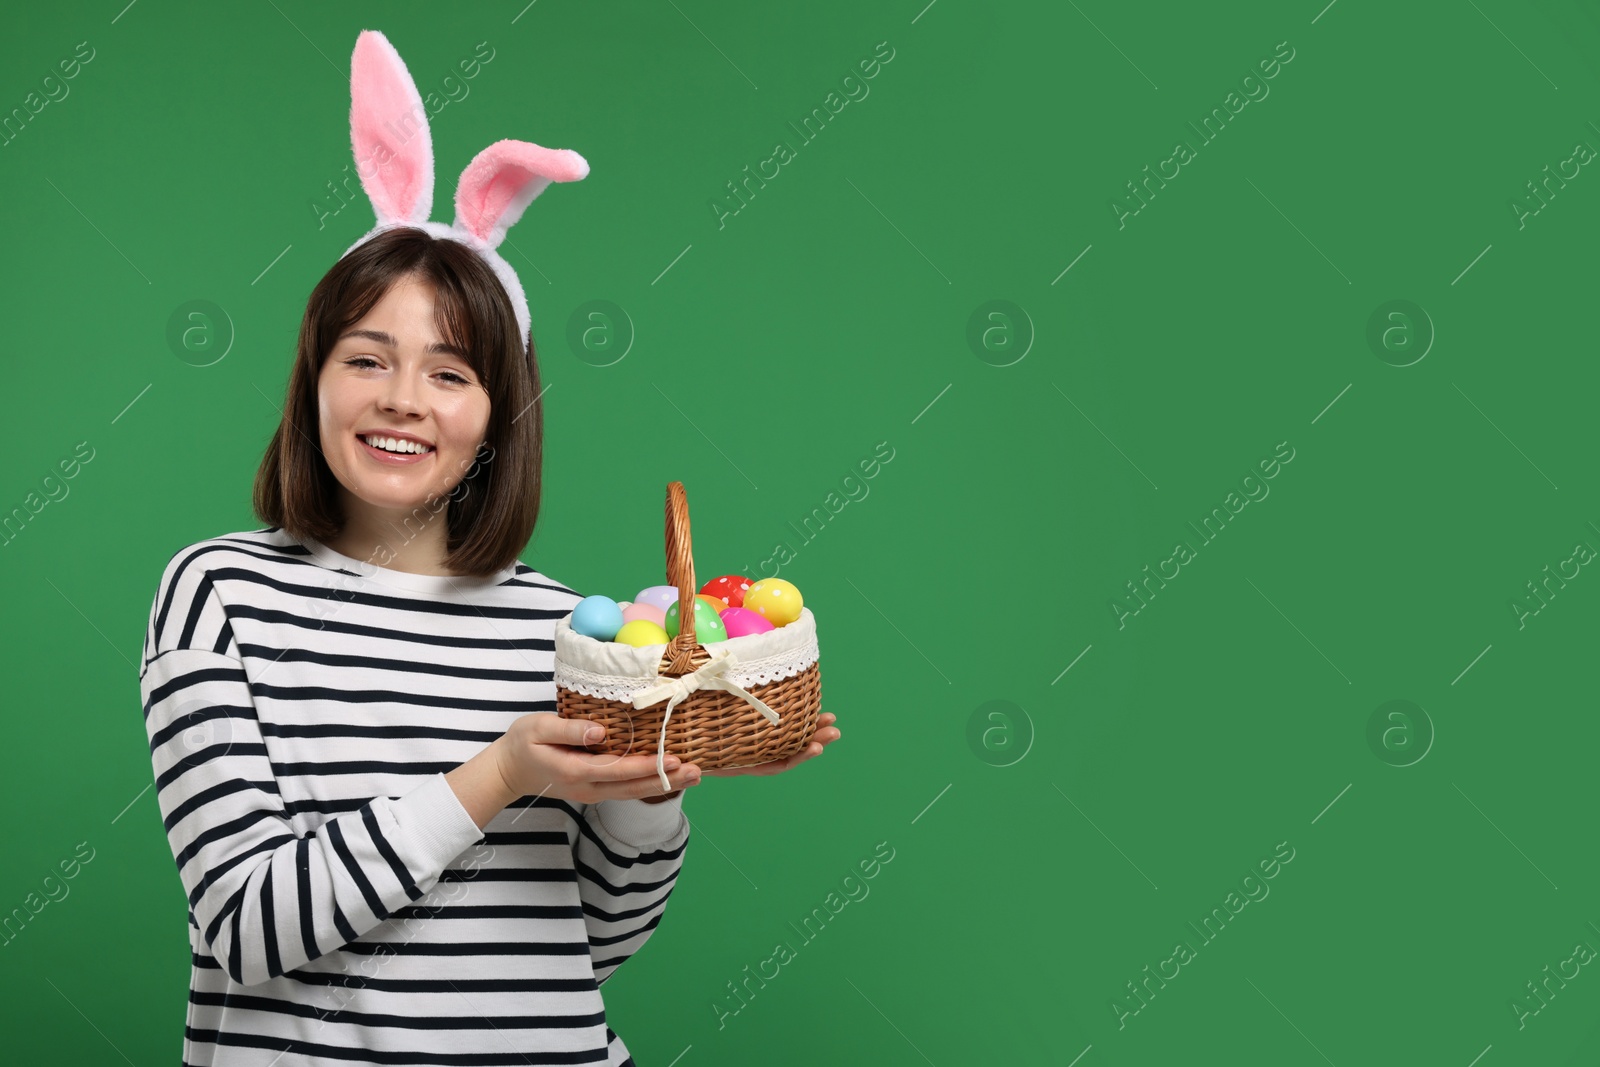 Photo of Easter celebration. Happy woman with bunny ears and wicker basket full of painted eggs on green background, space for text